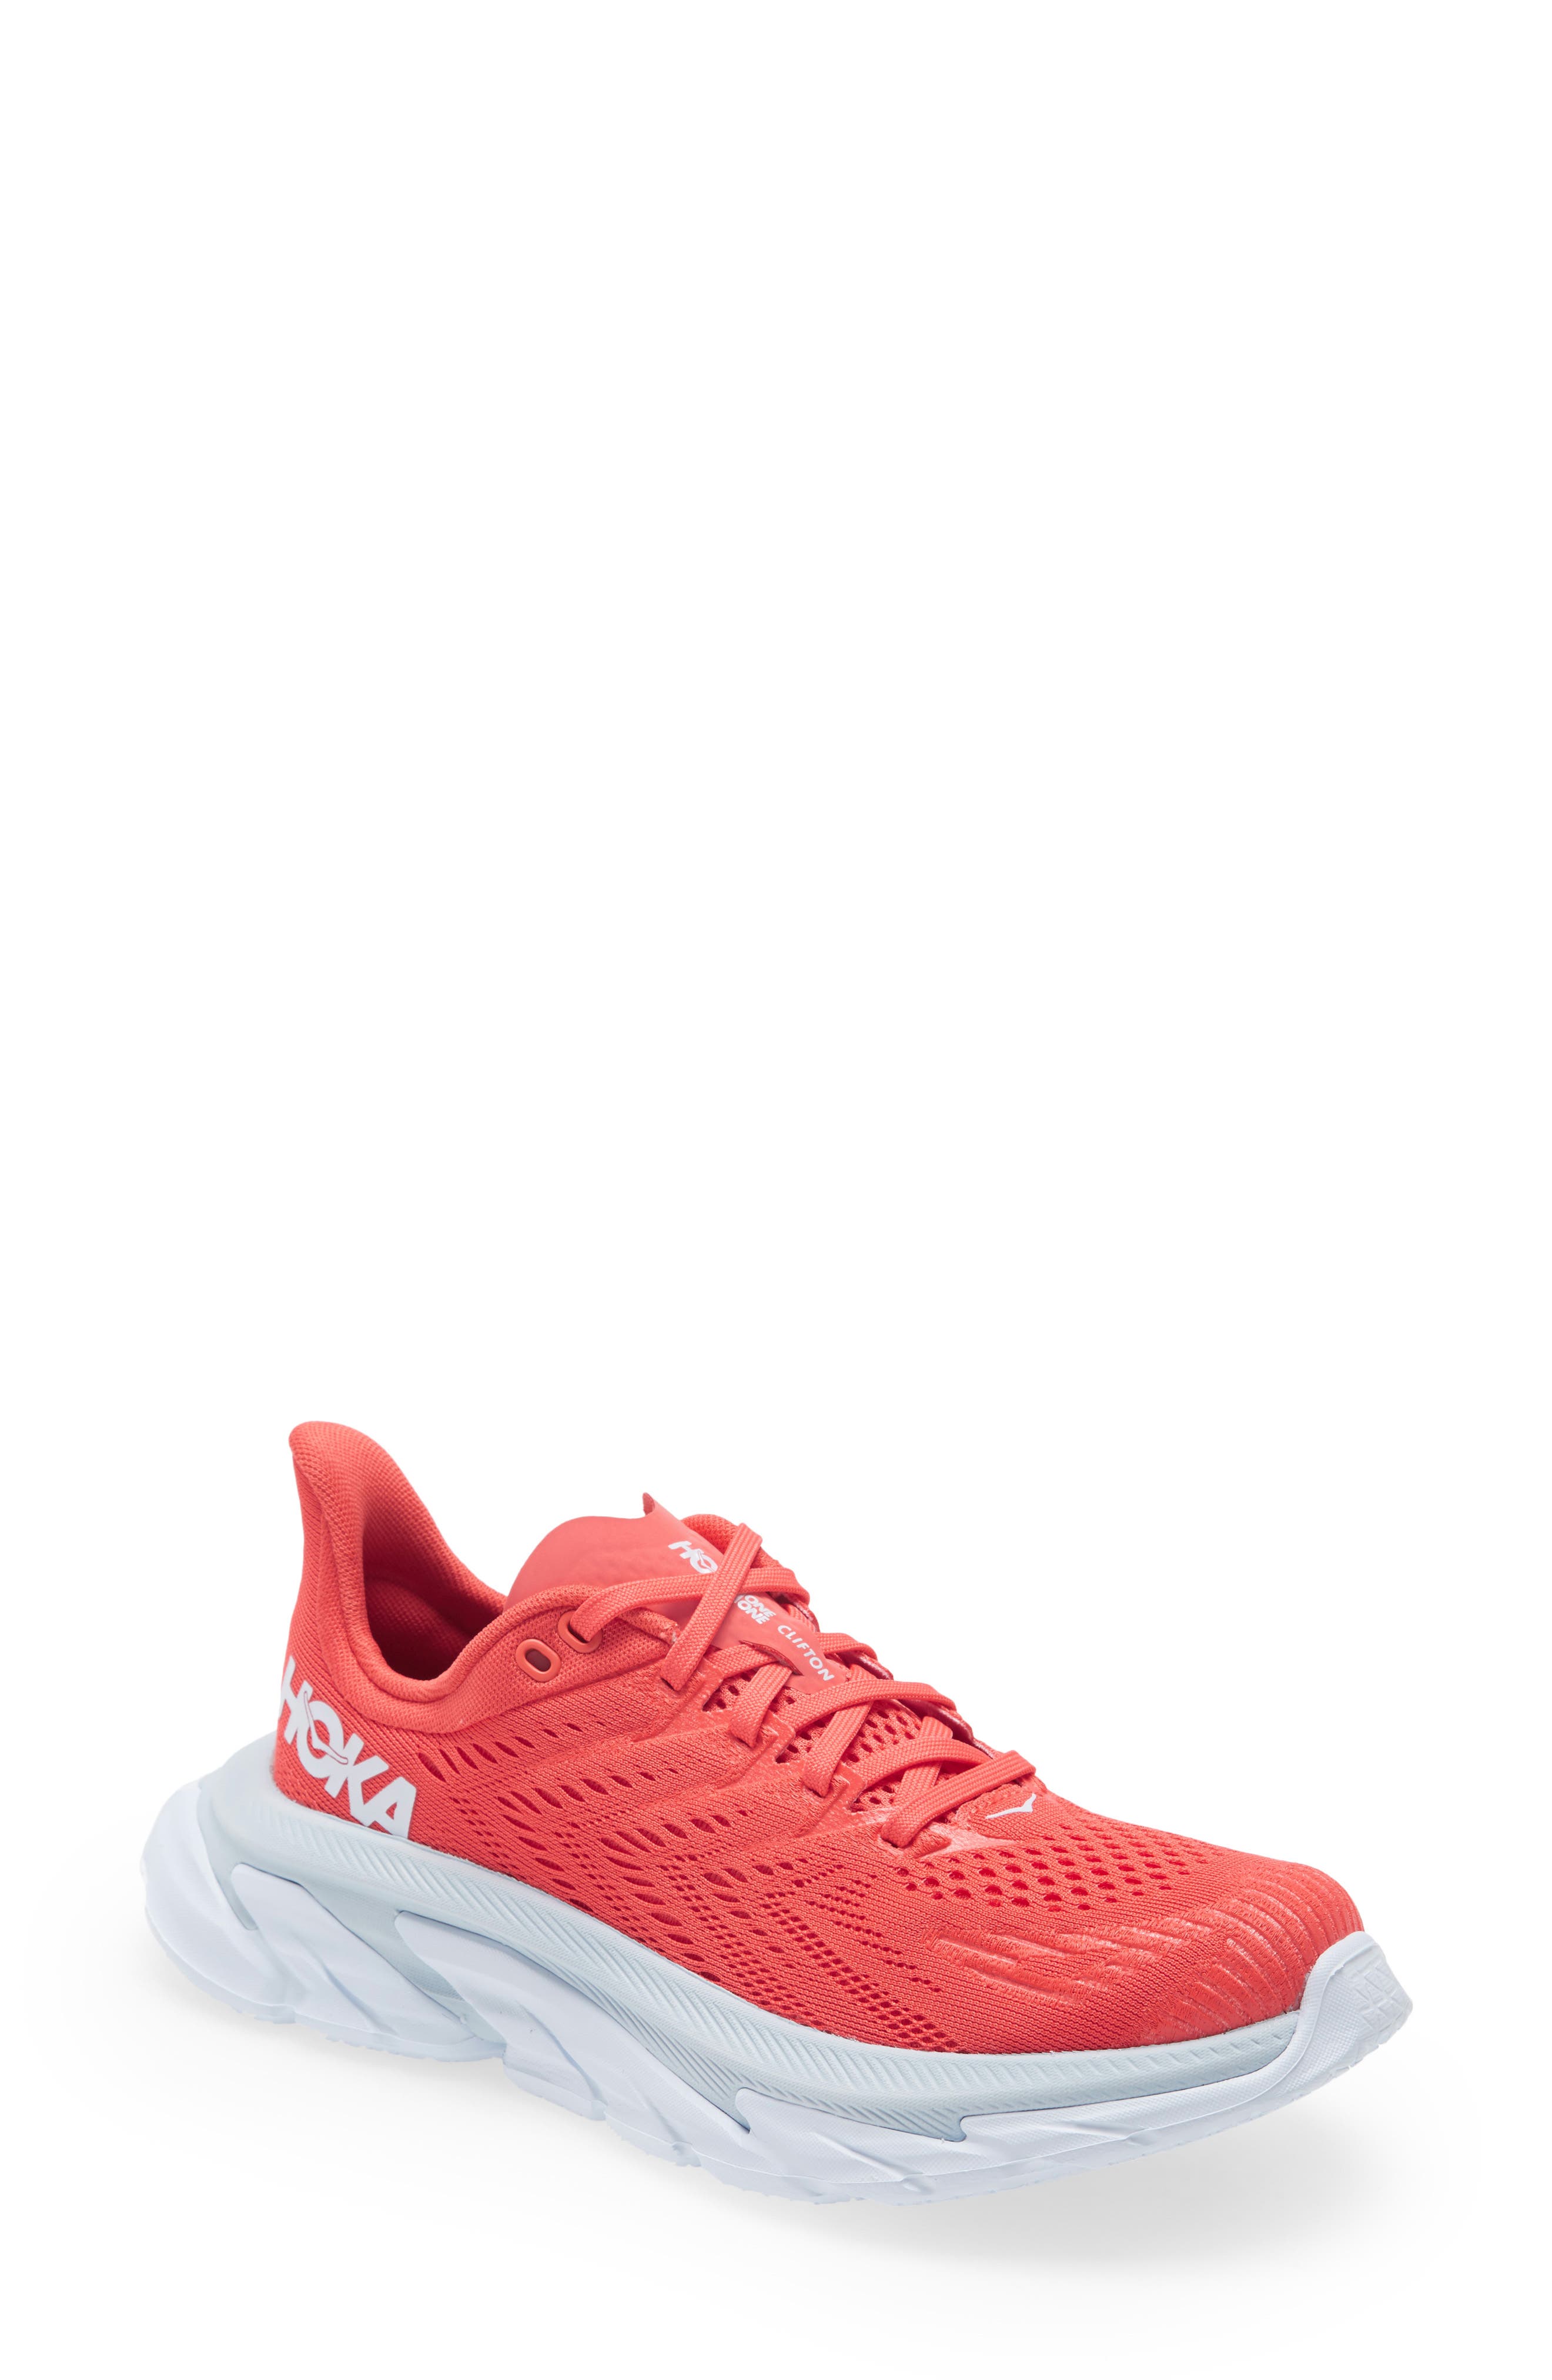 red womens running shoes